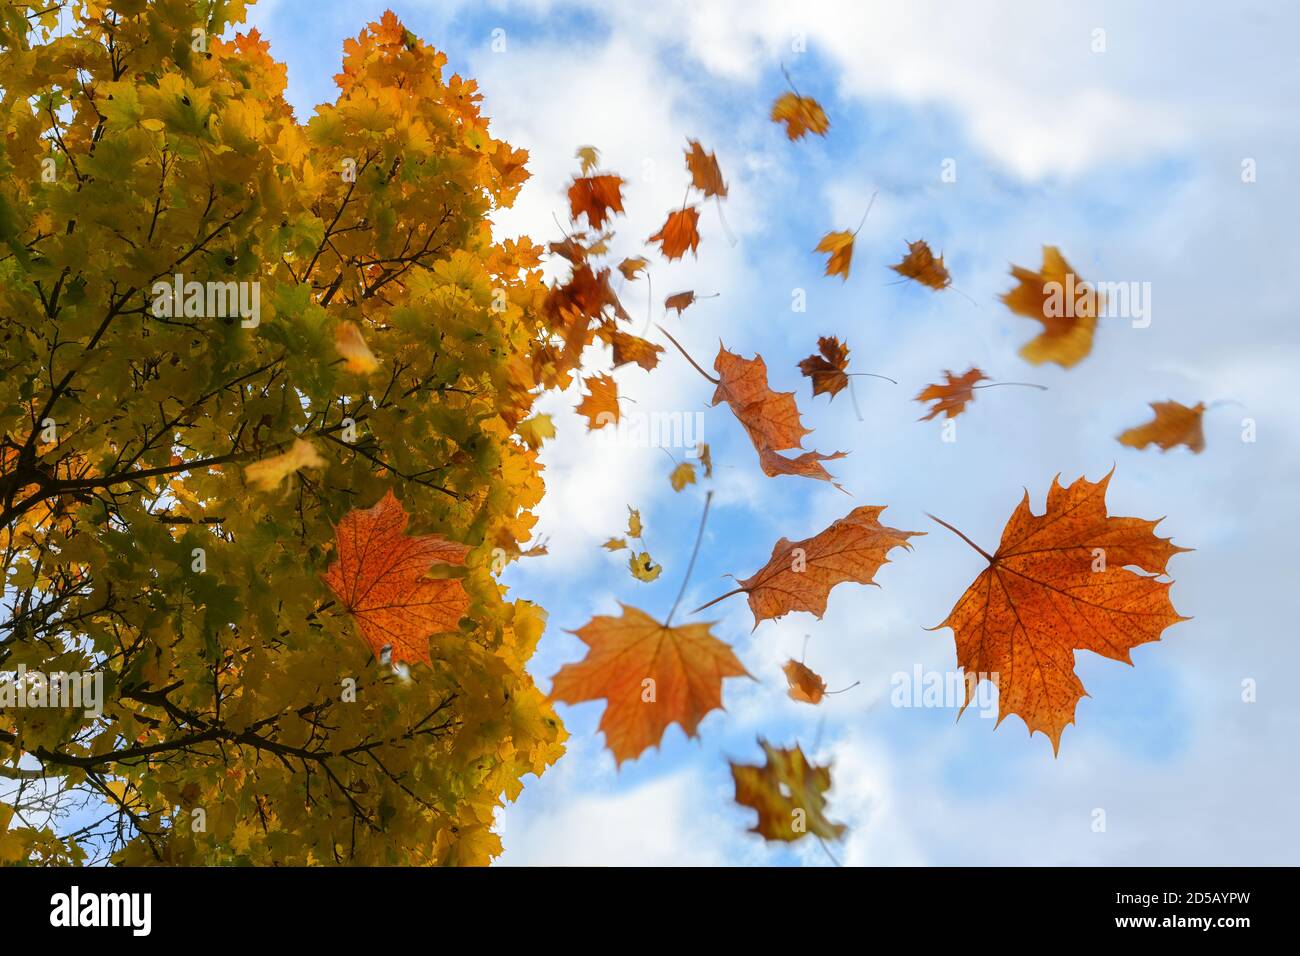 Colorful autumn leaves in red and golden falling from a maple tree, blue sky with clouds, motion blur, selected focus, narrow depth of field Stock Photo